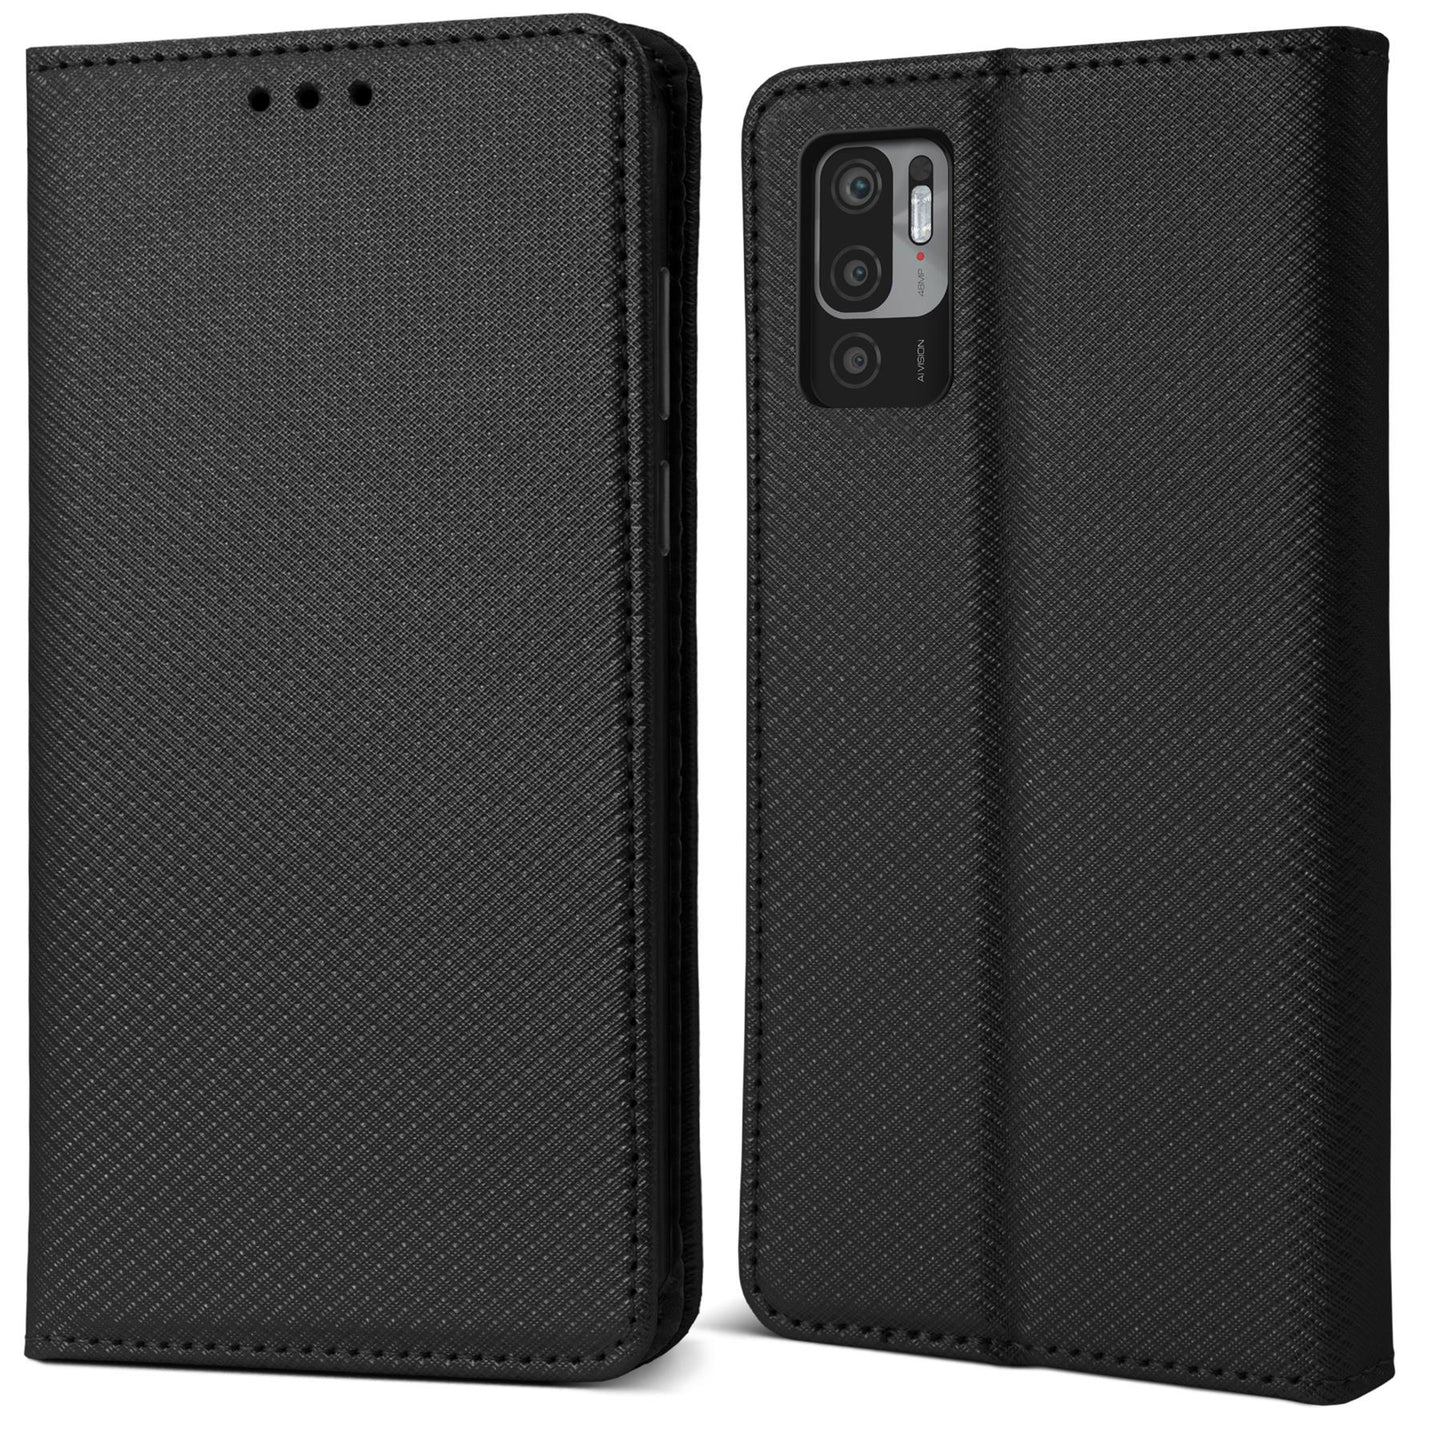 Moozy Case Flip Cover for Xiaomi Redmi Note 10 5G and Poco M3 Pro 5G, Black - Smart Magnetic Flip Case Flip Folio Wallet Case with Card Holder and Stand, Credit Card Slots, Kickstand Function